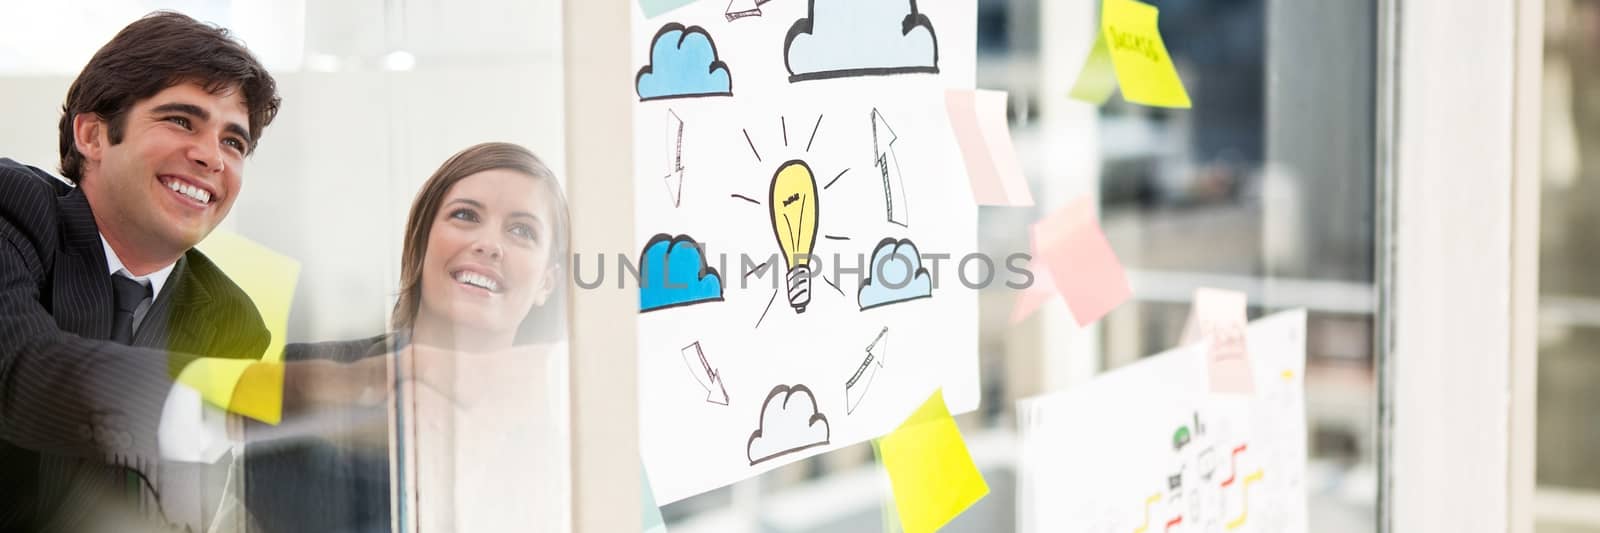 Business people smiling with window and sticky notes transition by Wavebreakmedia